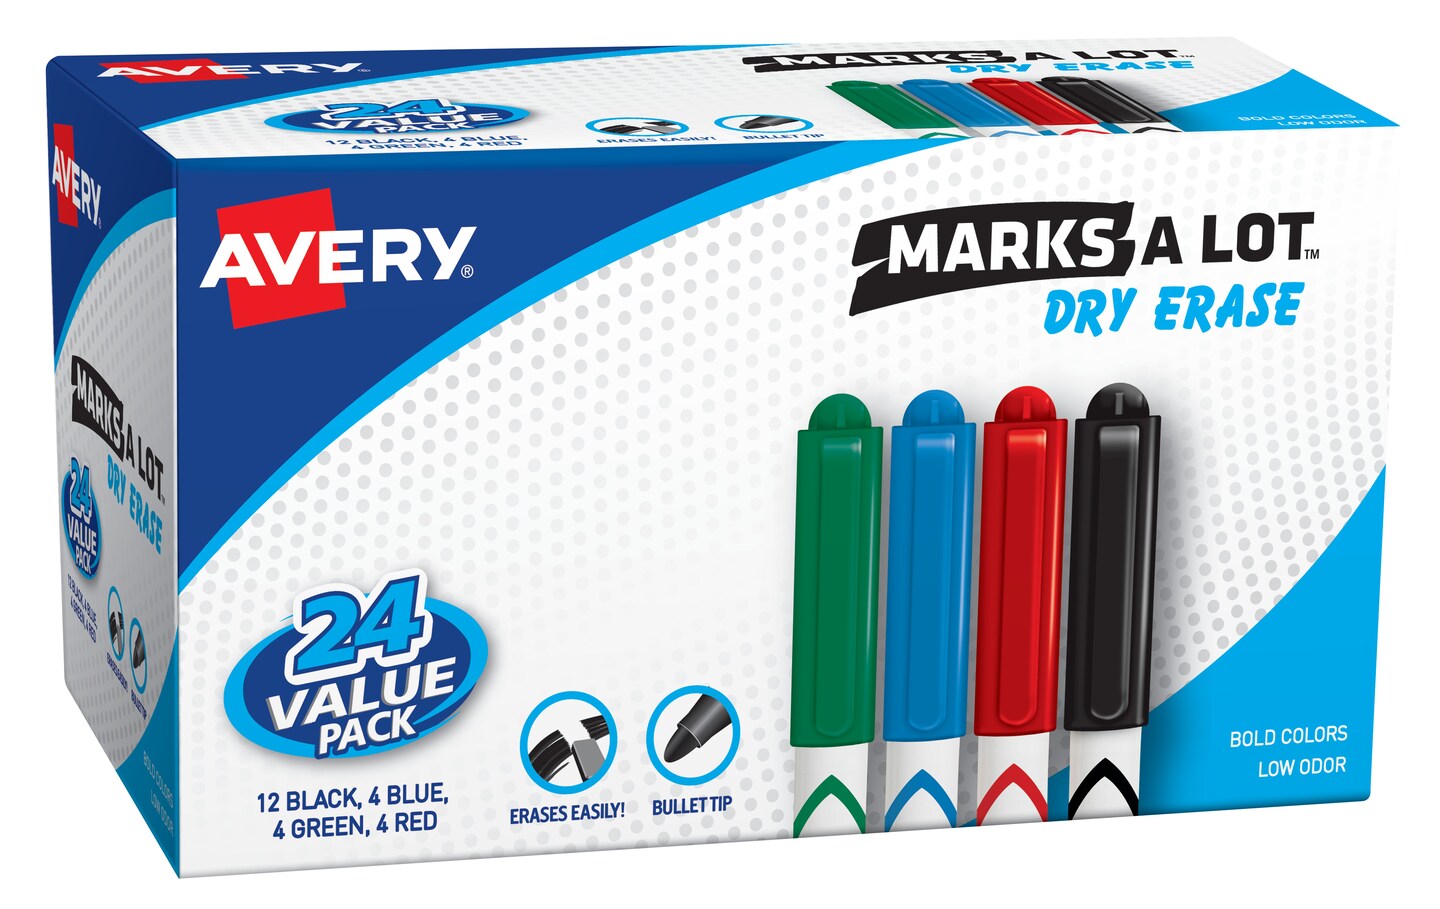 Avery Marks A Lot Pen-Style Dry Erase Markers, Bullet Tip, Assorted Colors, Value Pack of 24 (29860)